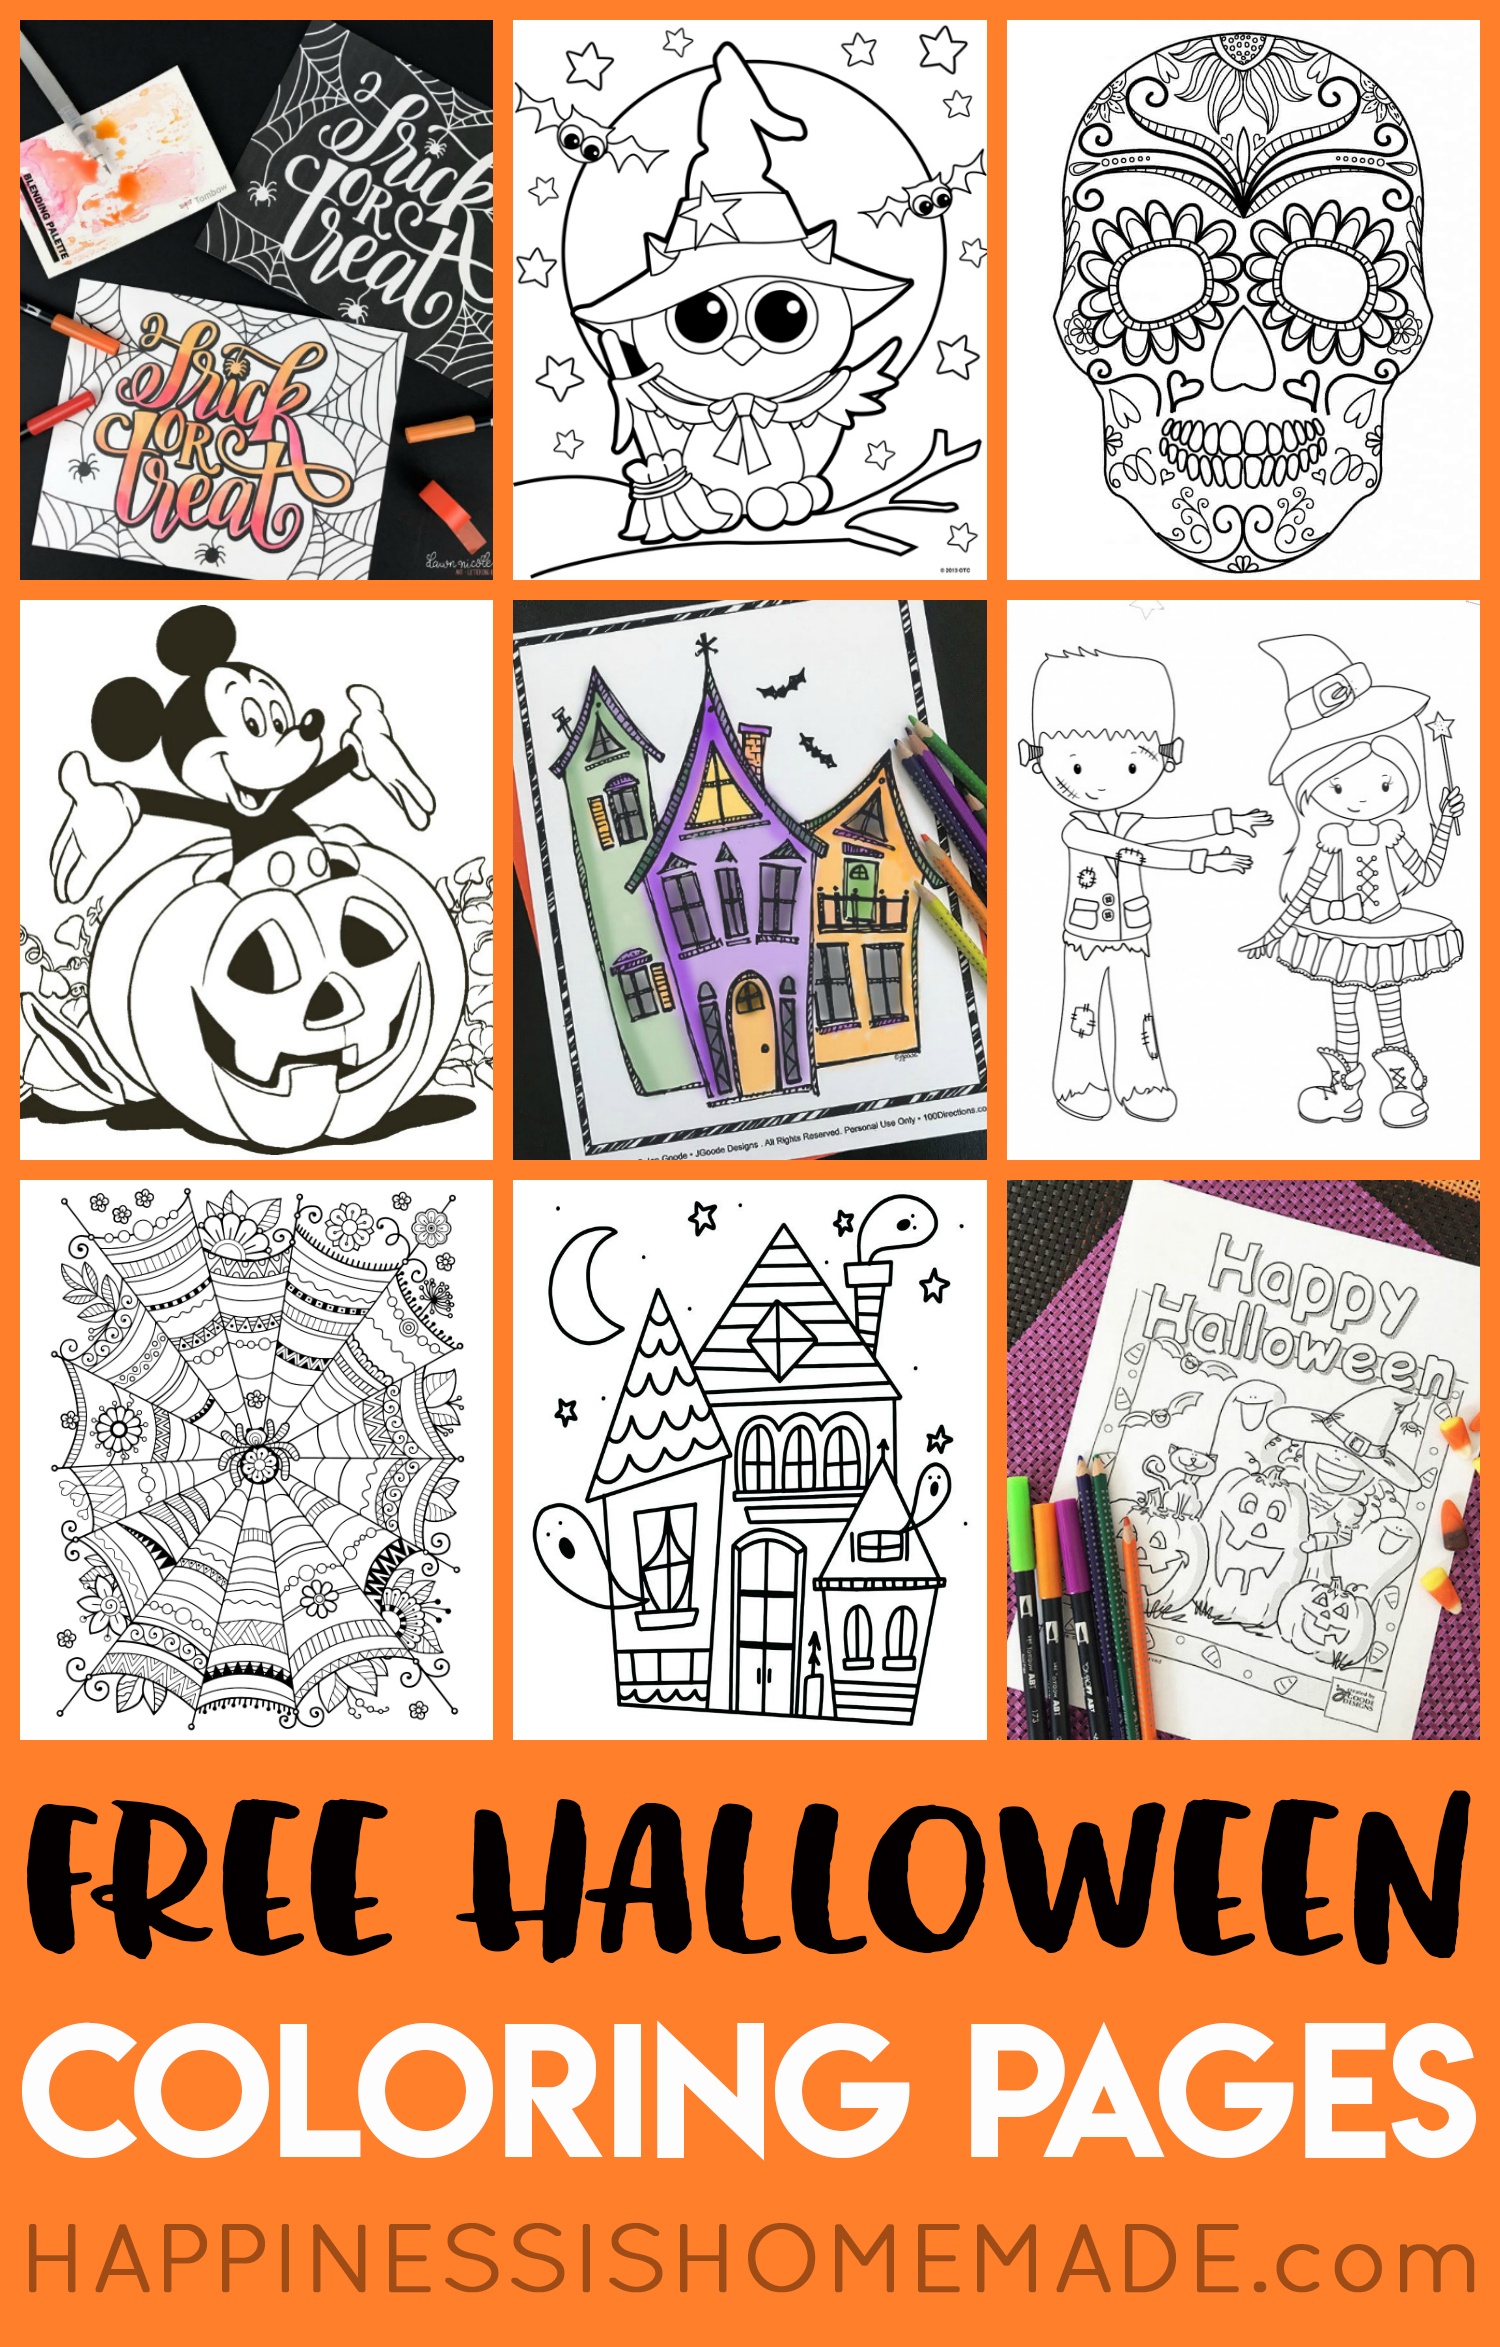 Free Halloween Coloring Pages For Adults &amp;amp; Kids - Happiness Is Homemade - Free Printable Halloween Cards